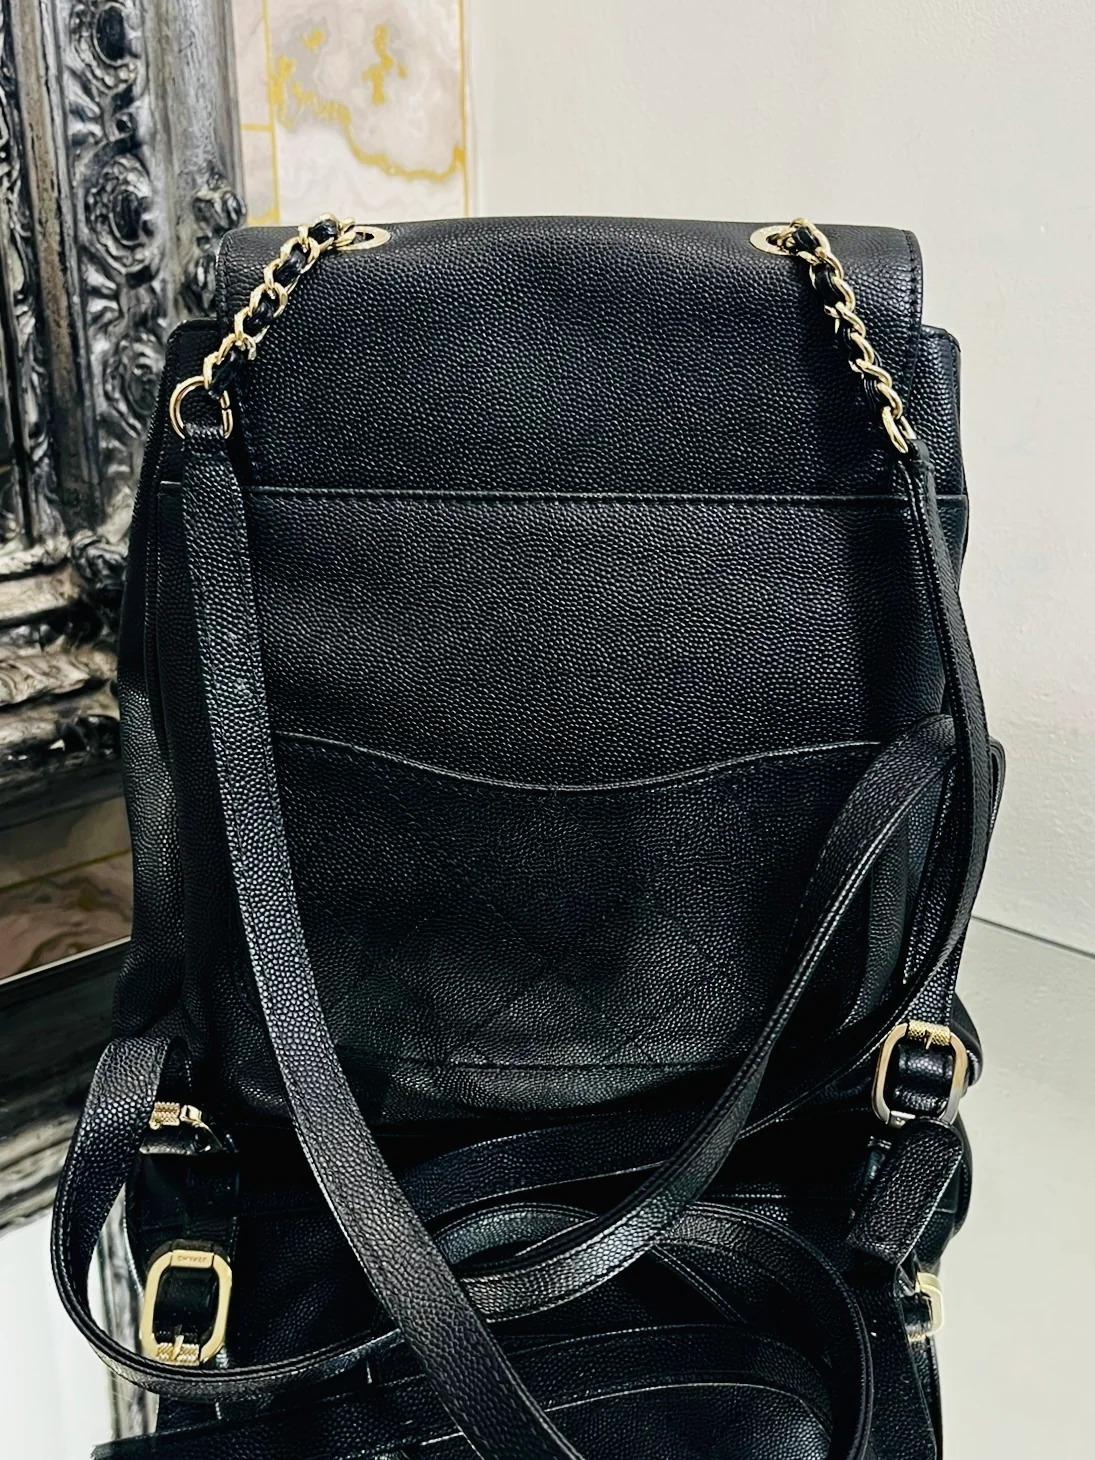 Women's Chanel Affinity Caviar Leather Backpack